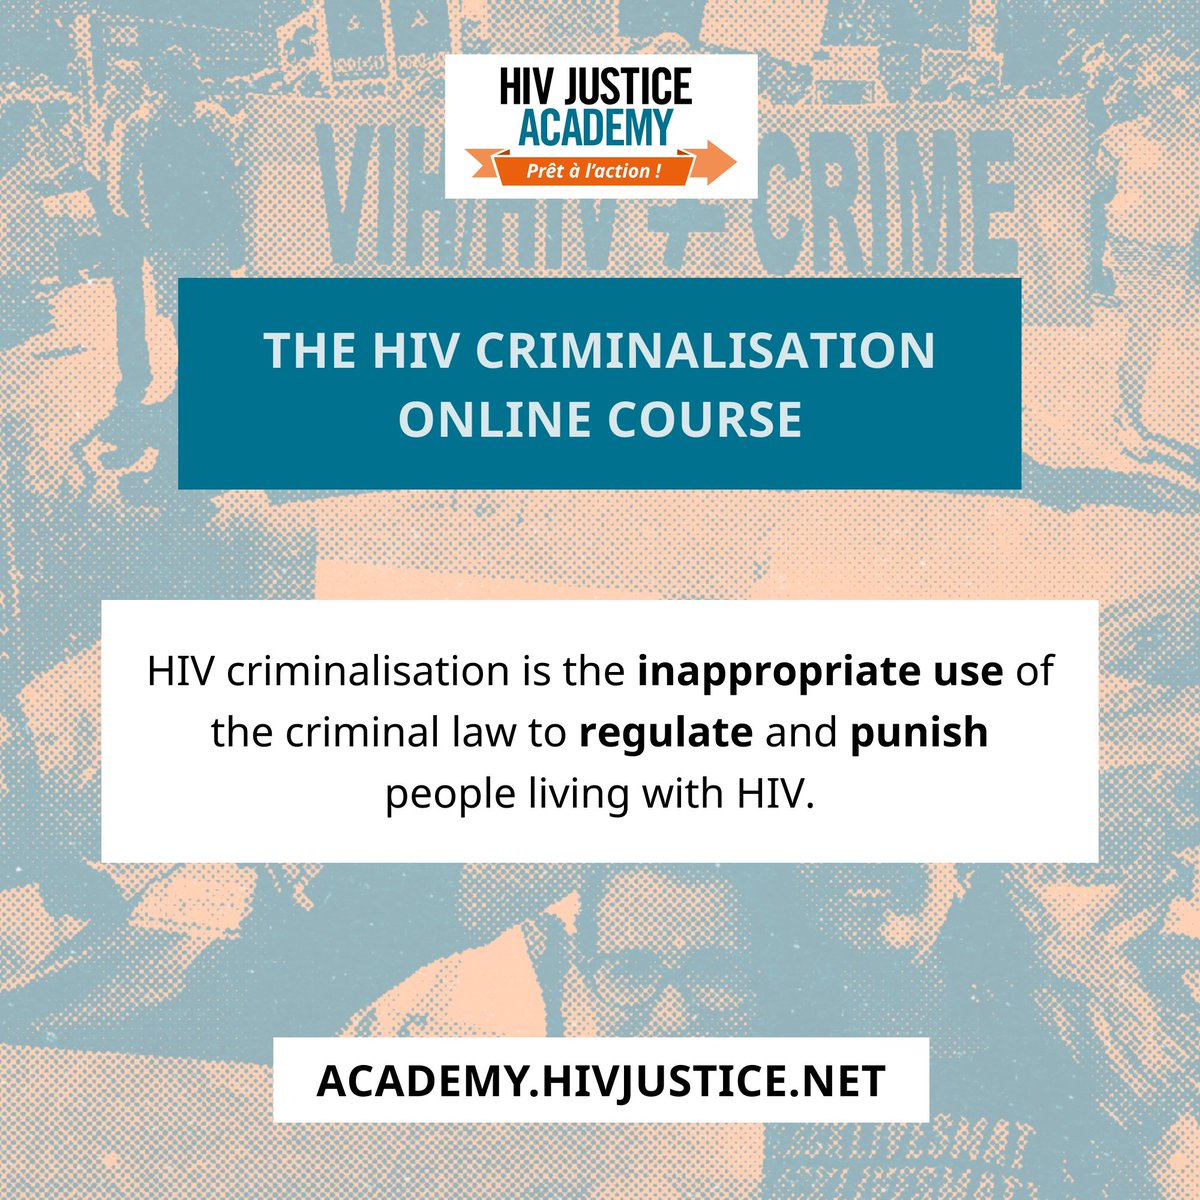 🌏Examples from around the globe 🗣️First hand testimonials All show ➡️ HIV criminalisation is not fit for purpose Learn why HIV criminalisation is harmful Check out the HIV Criminalization online course academy.hivjustice.net/learning/